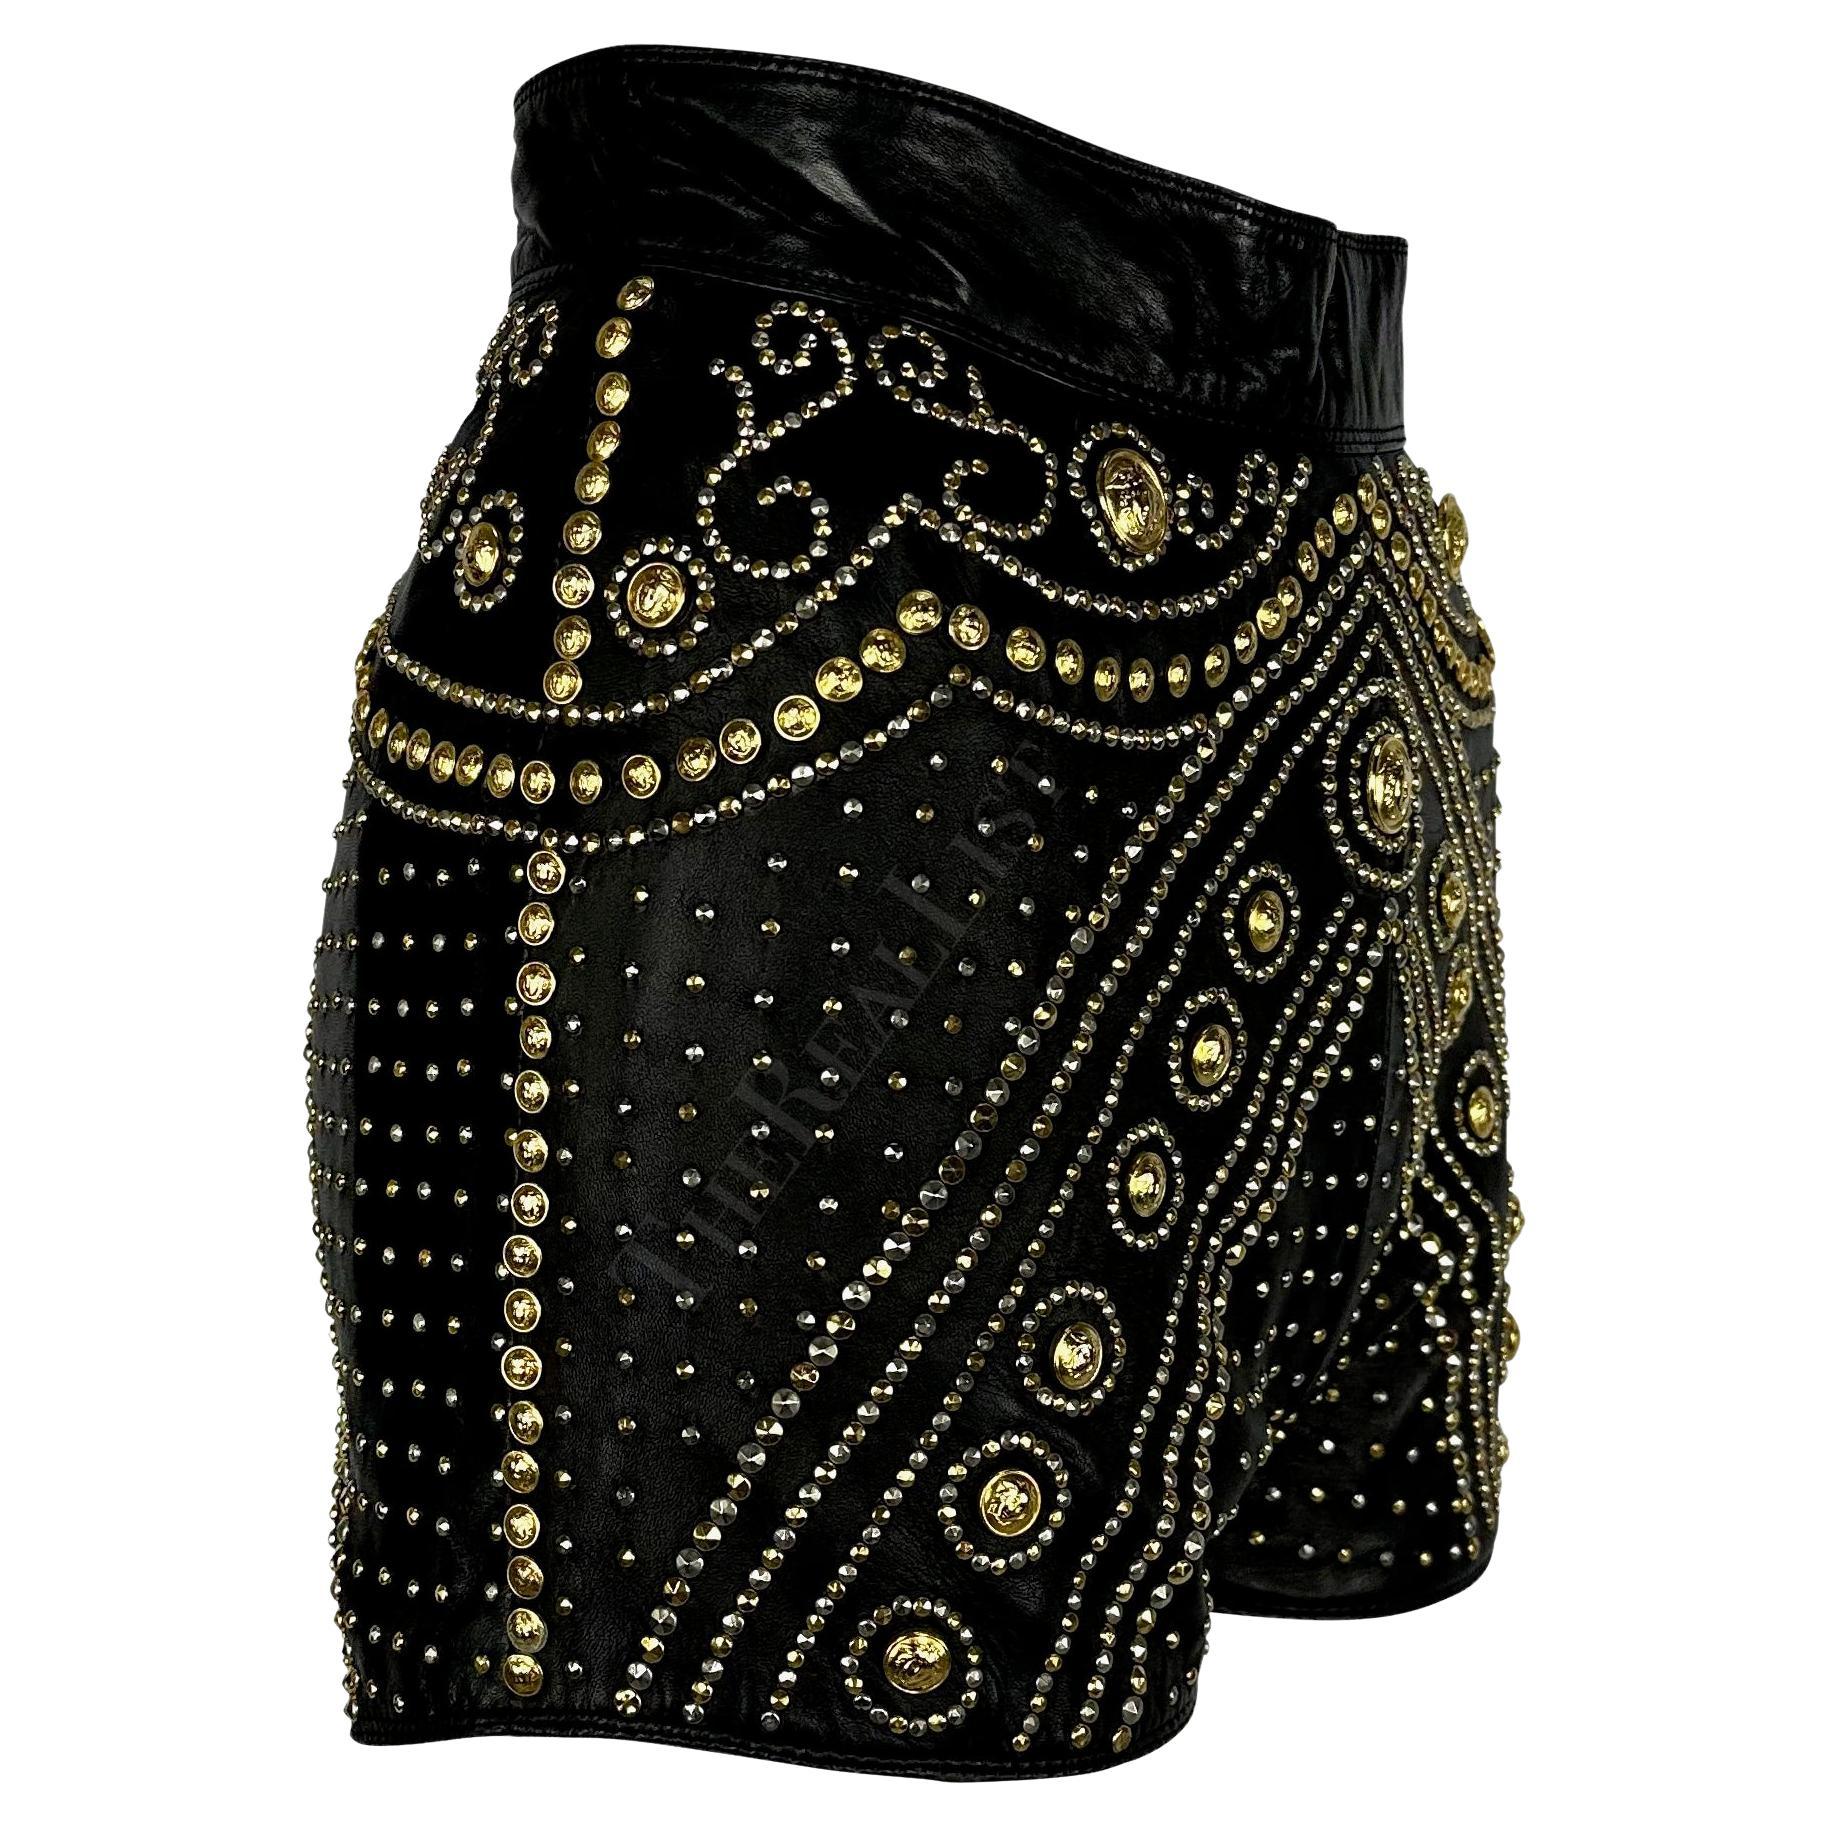 F/W 1992 Atelier Versace Haute Couture Runway Medusa Studded Leather Shorts For Sale 6